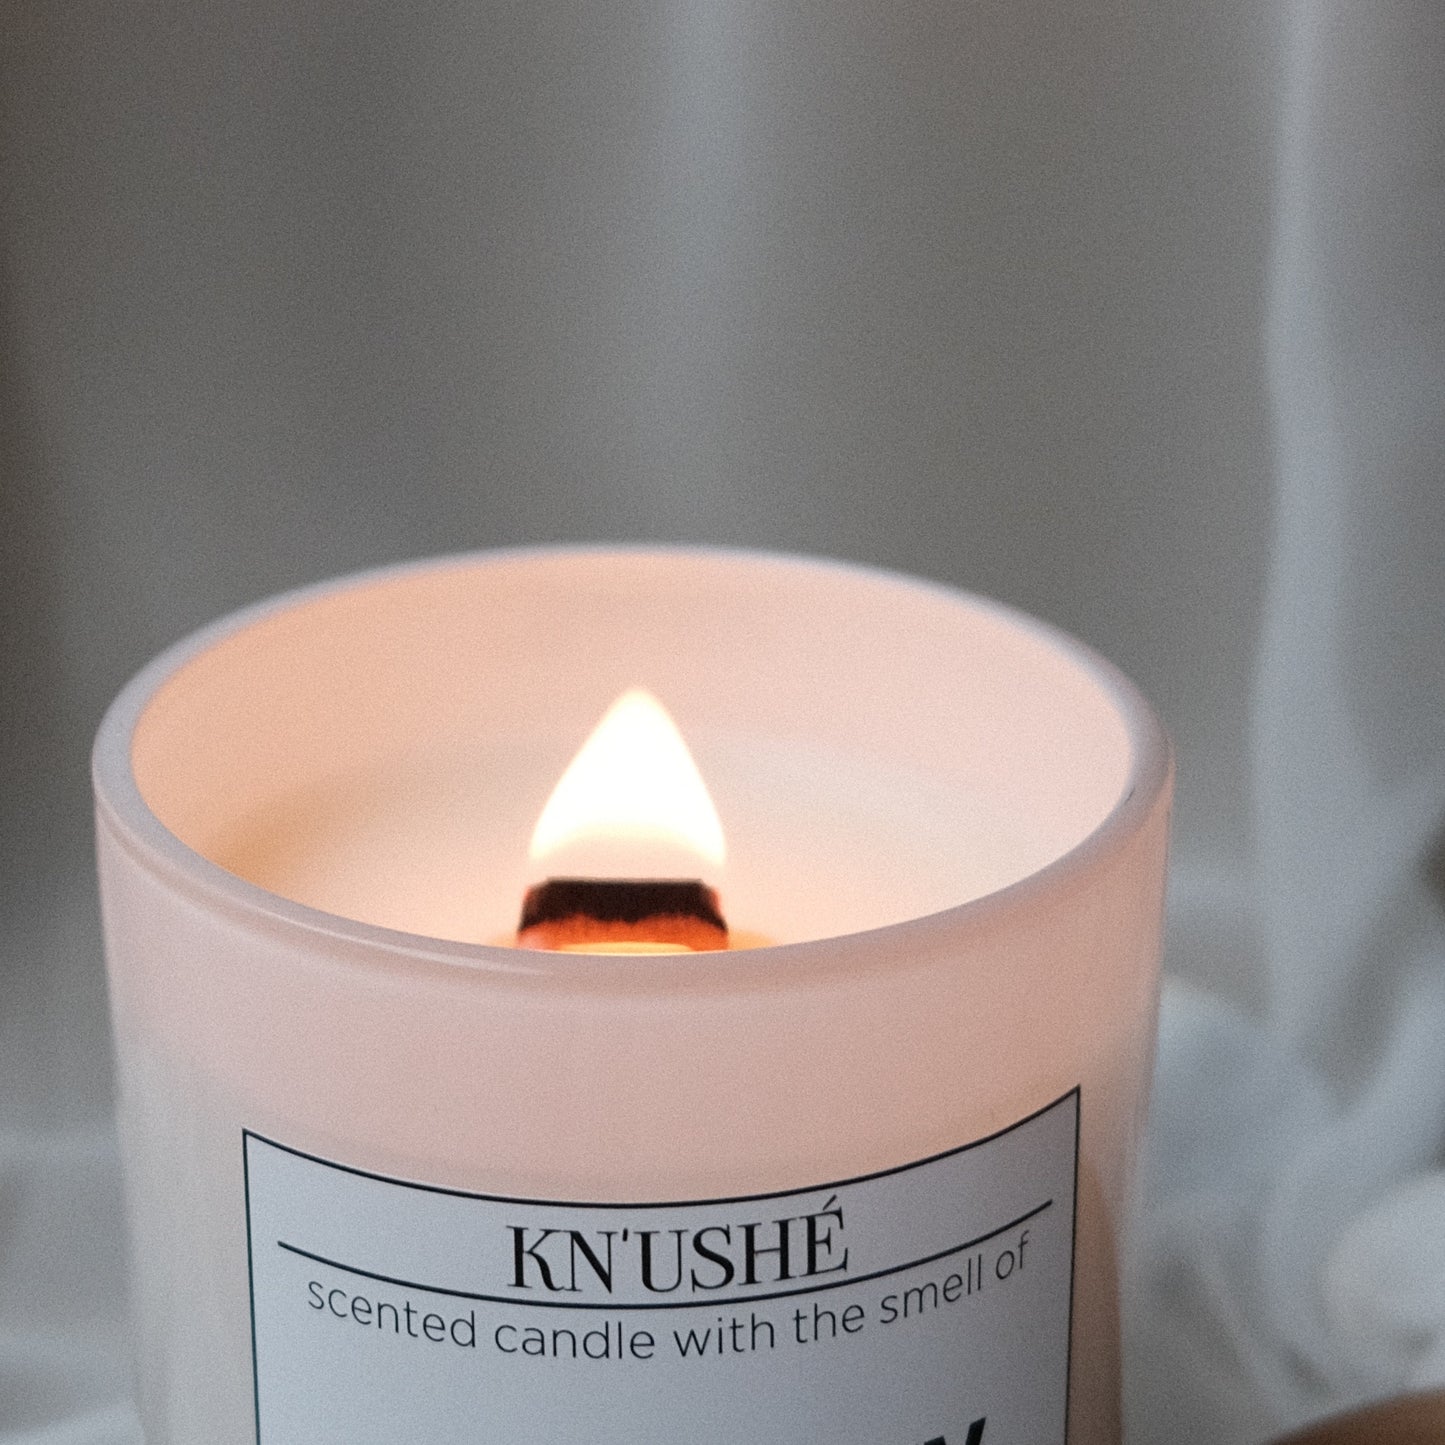 Scented candle  with the smell of "BOOKWORM"